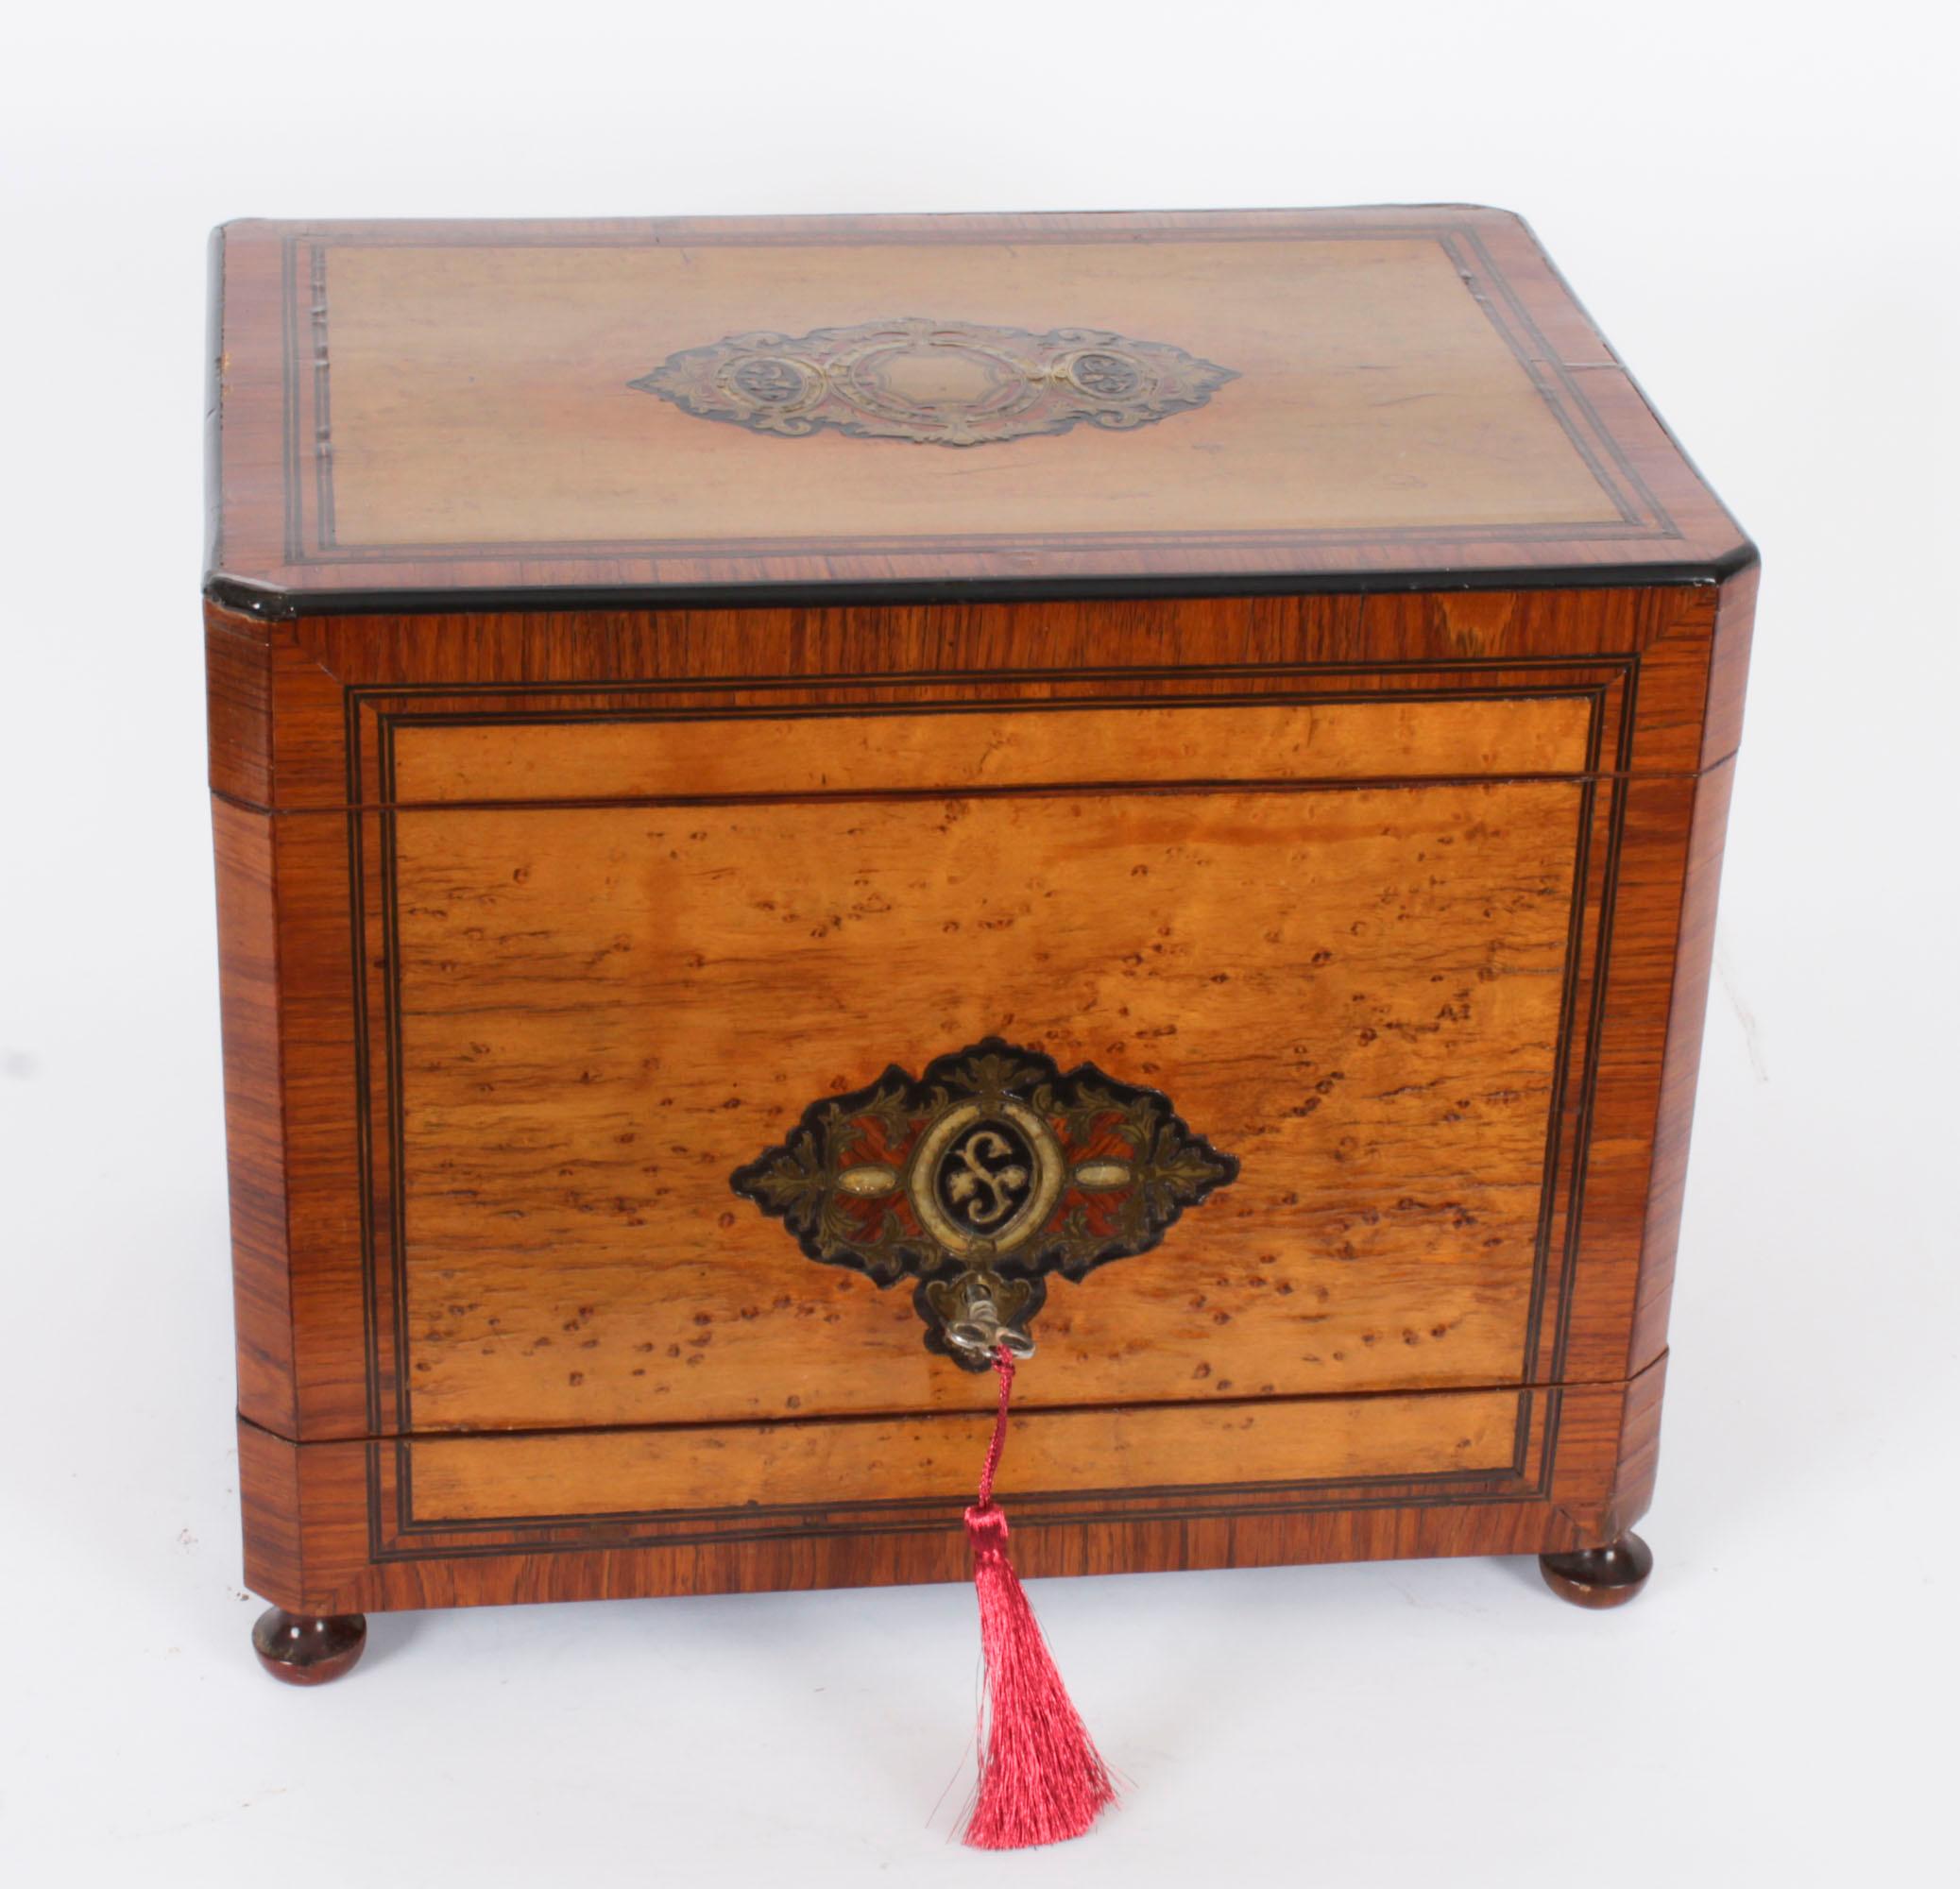 This is an exquisite antique French Napoleon III birdseye maple Tantalus Cave a Liqueur, circa 1860 in date. 

It features brass inlaid decoration on the top and front with tulip wood banding. The hinged lid and the hinged sides open to reveal a